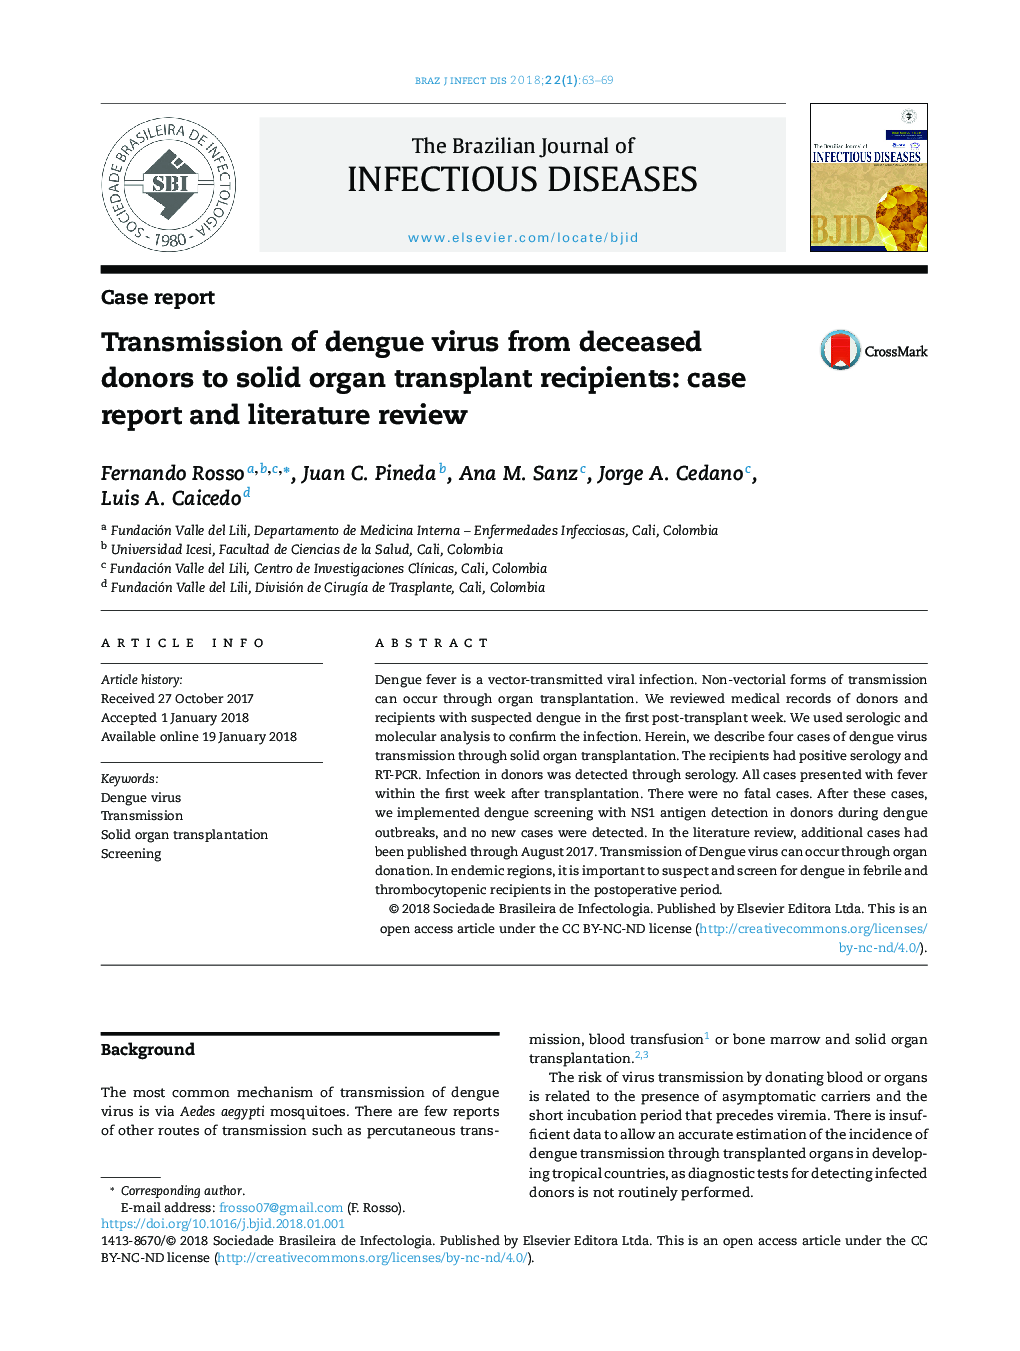 Transmission of dengue virus from deceased donors to solid organ transplant recipients: case report and literature review